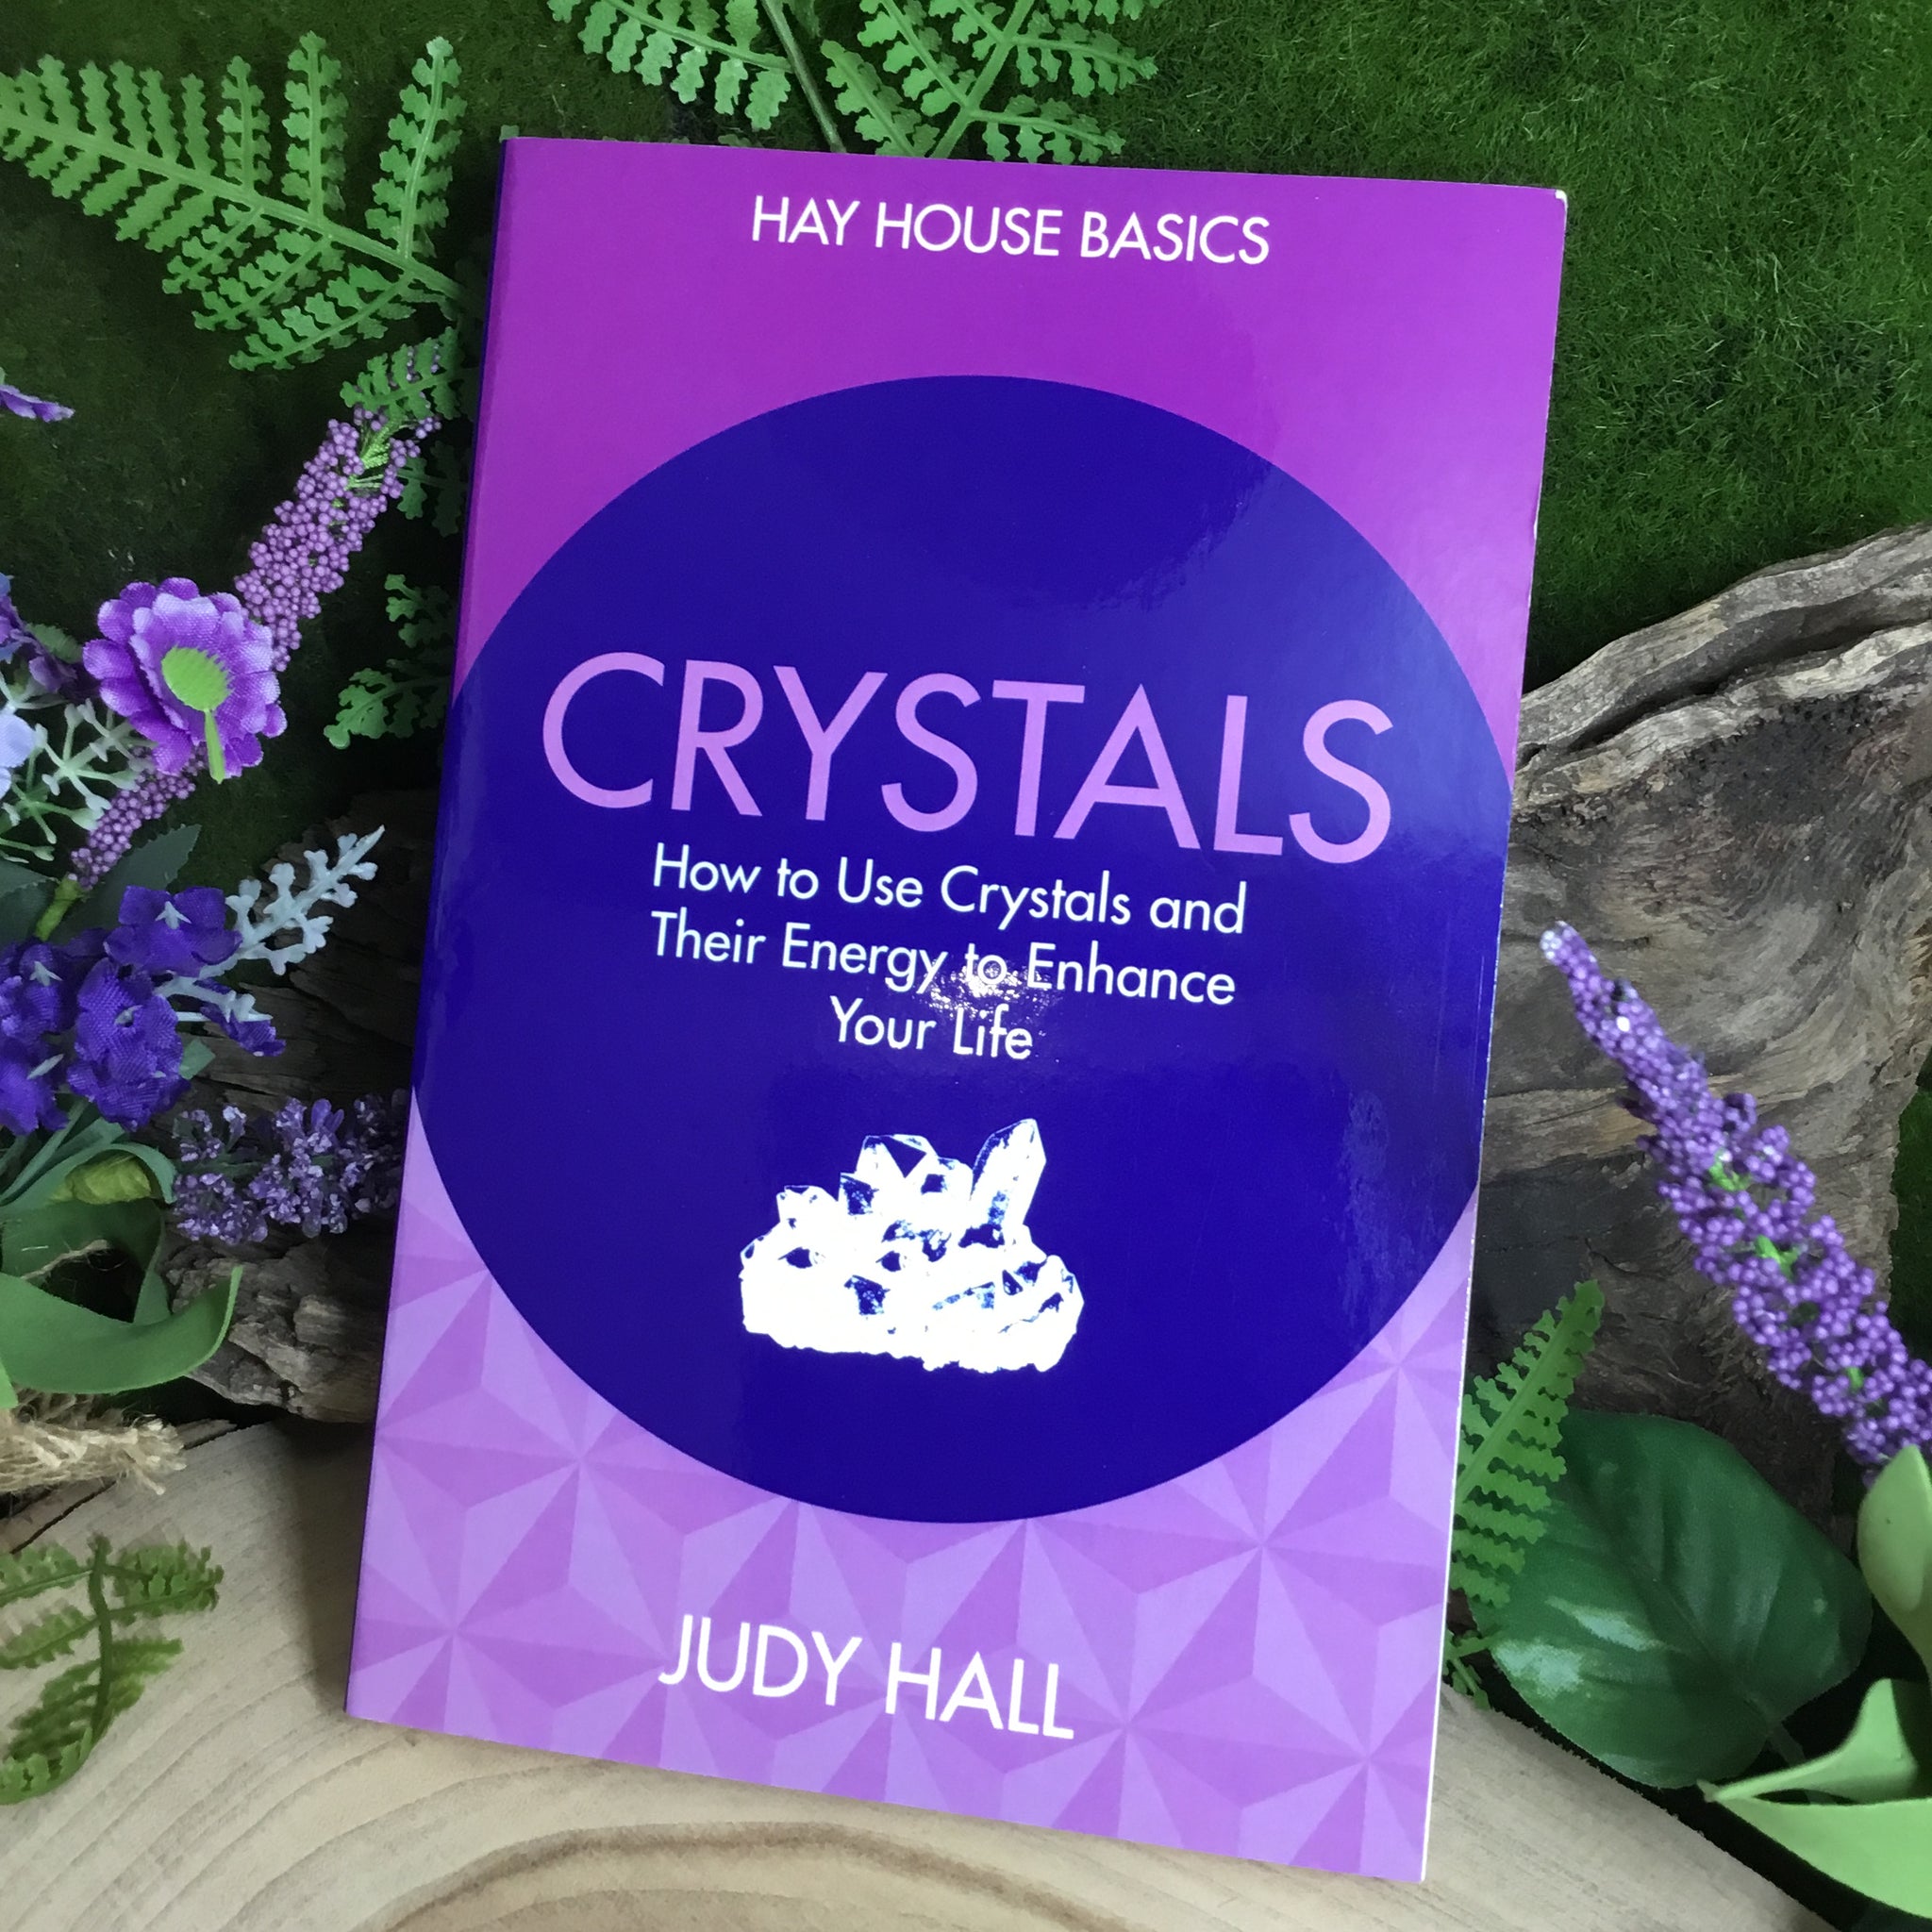 CRYSTALS how to use and their energy to enhance your life